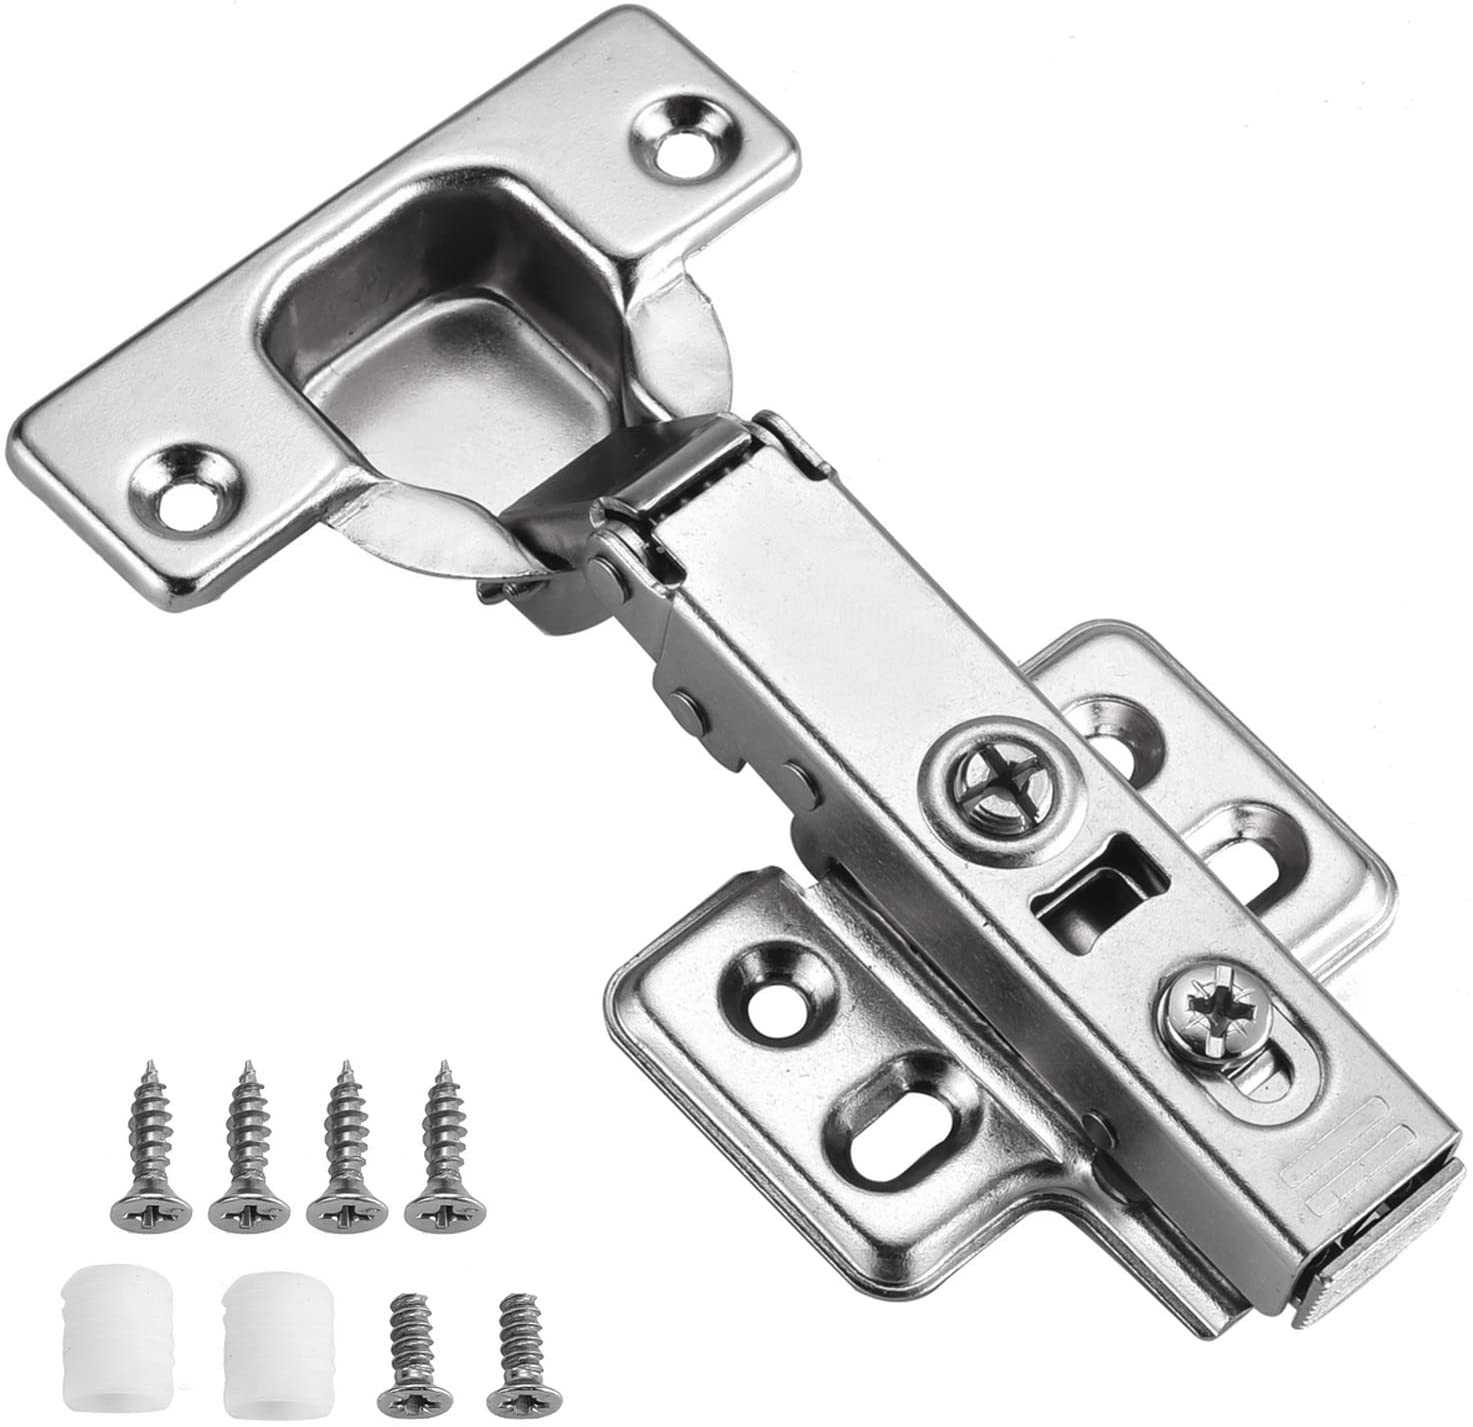 Luokim 10pcs Standard Cabinet Hinge,Fit for Frameless Cabinet,European Full Overlay,Soft Closing,Four-Hole mounting Plate Hinges,Nickel Plated Finish - image 1 of 7